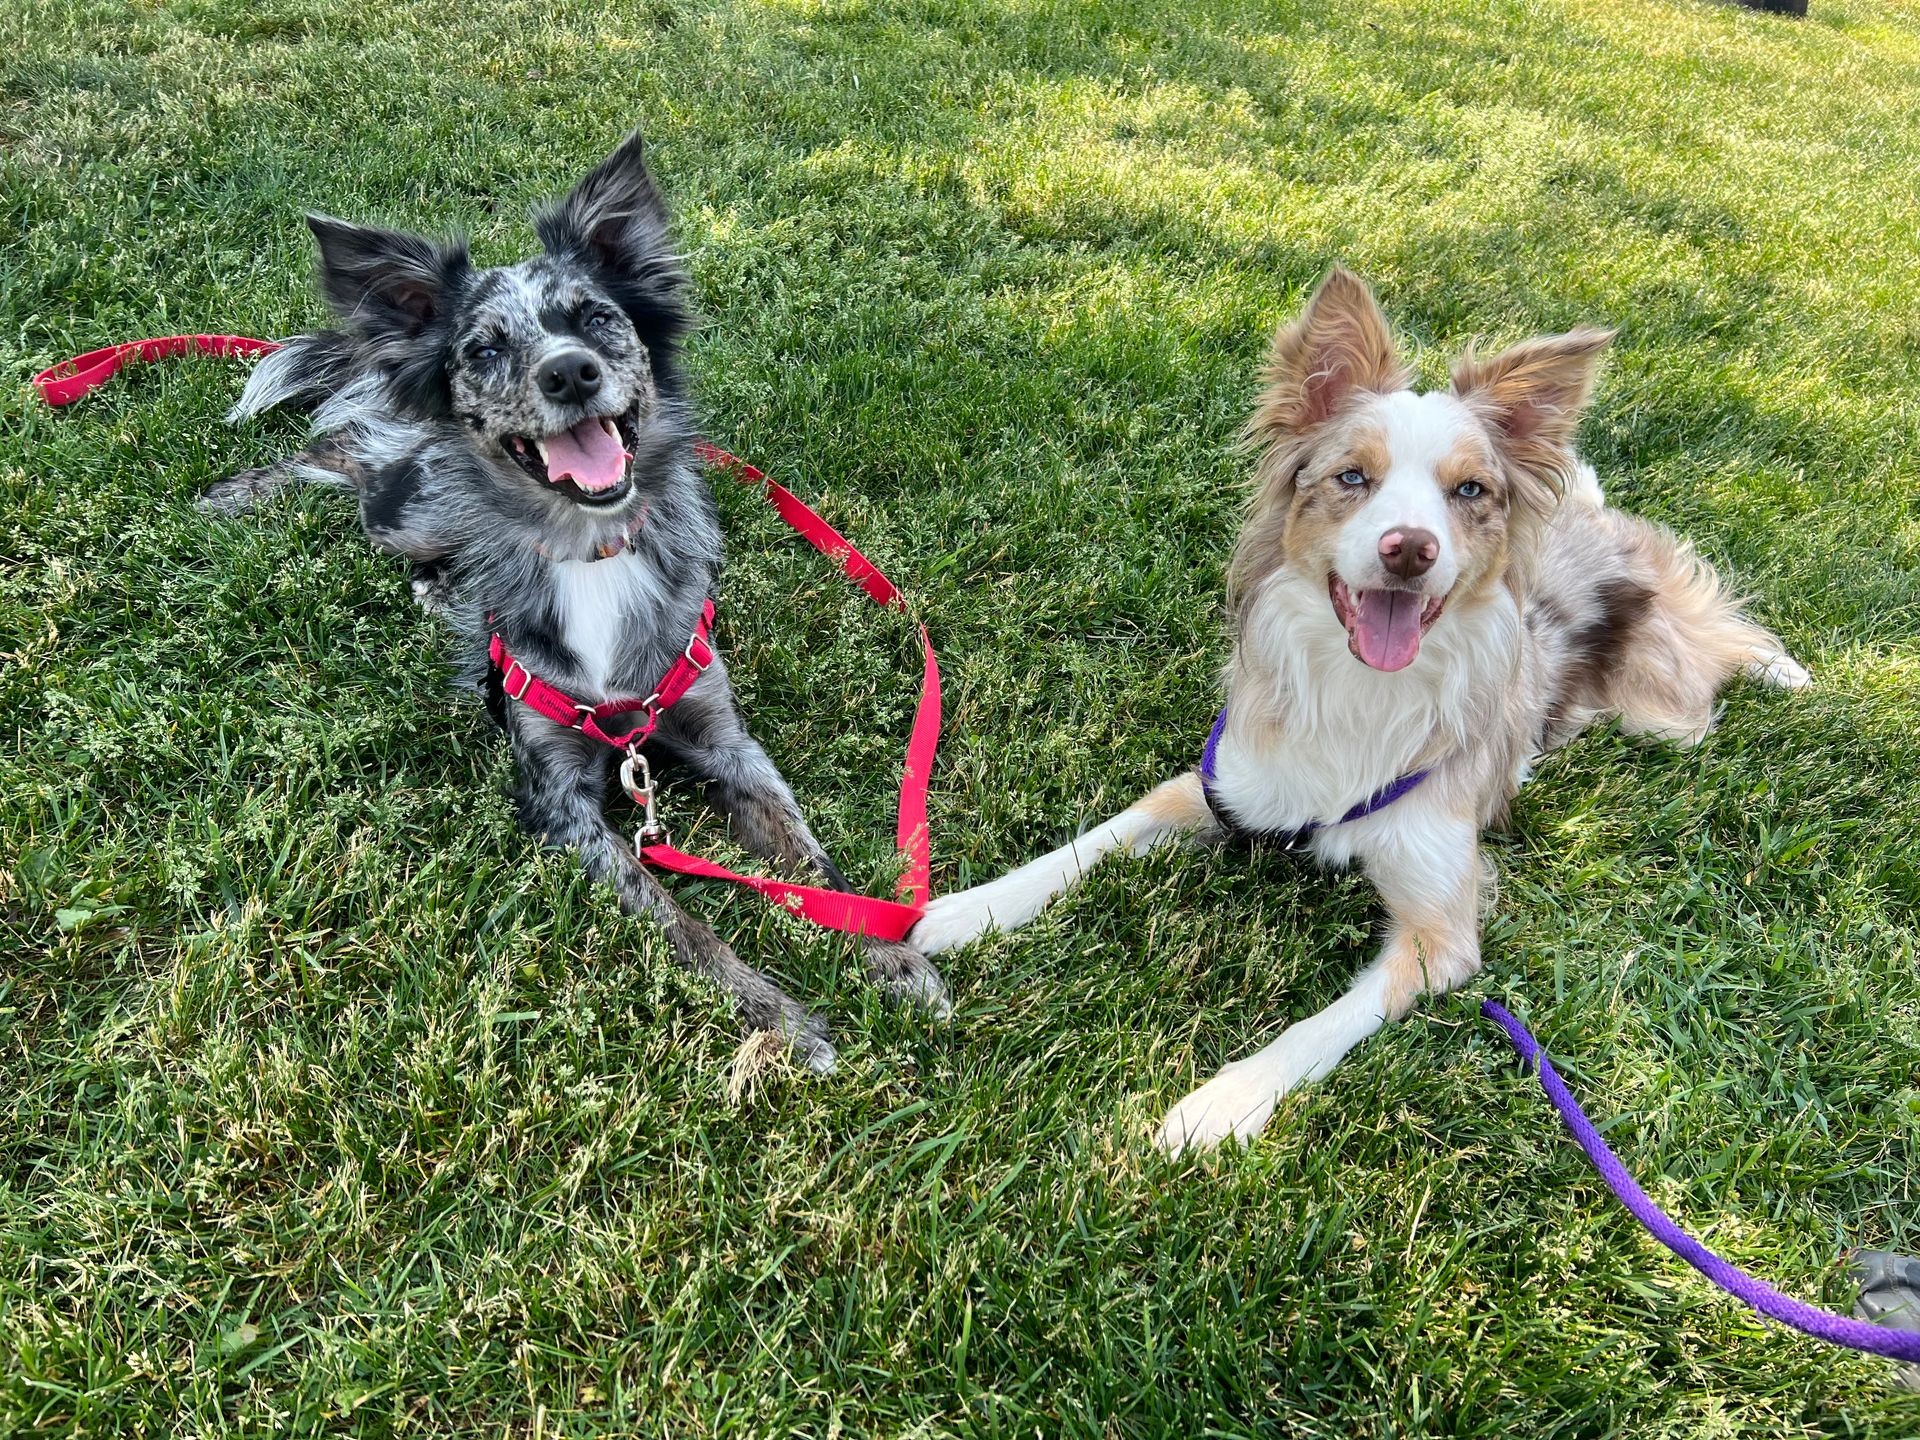 Two dogs on a walk